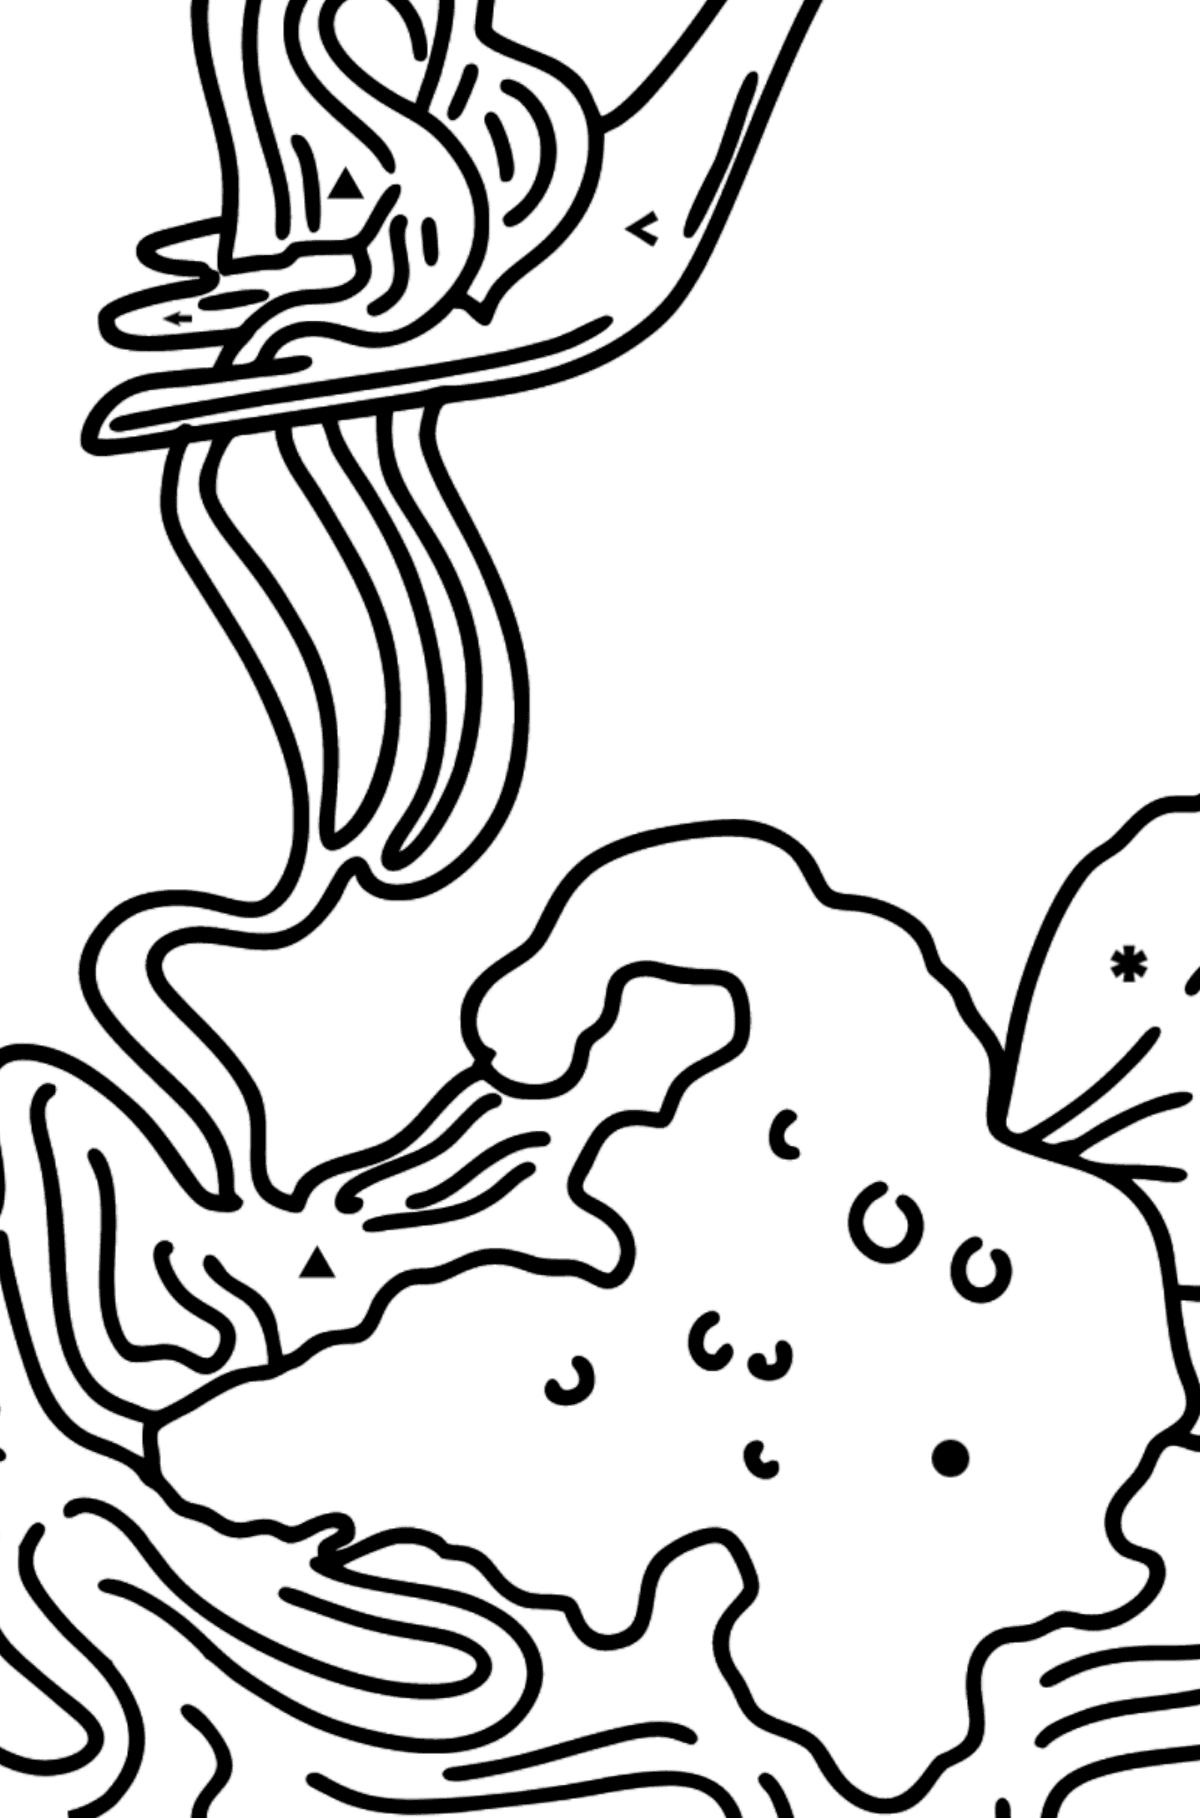 Spaghetti with Tomato Sauce coloring page - Coloring by Symbols for Kids